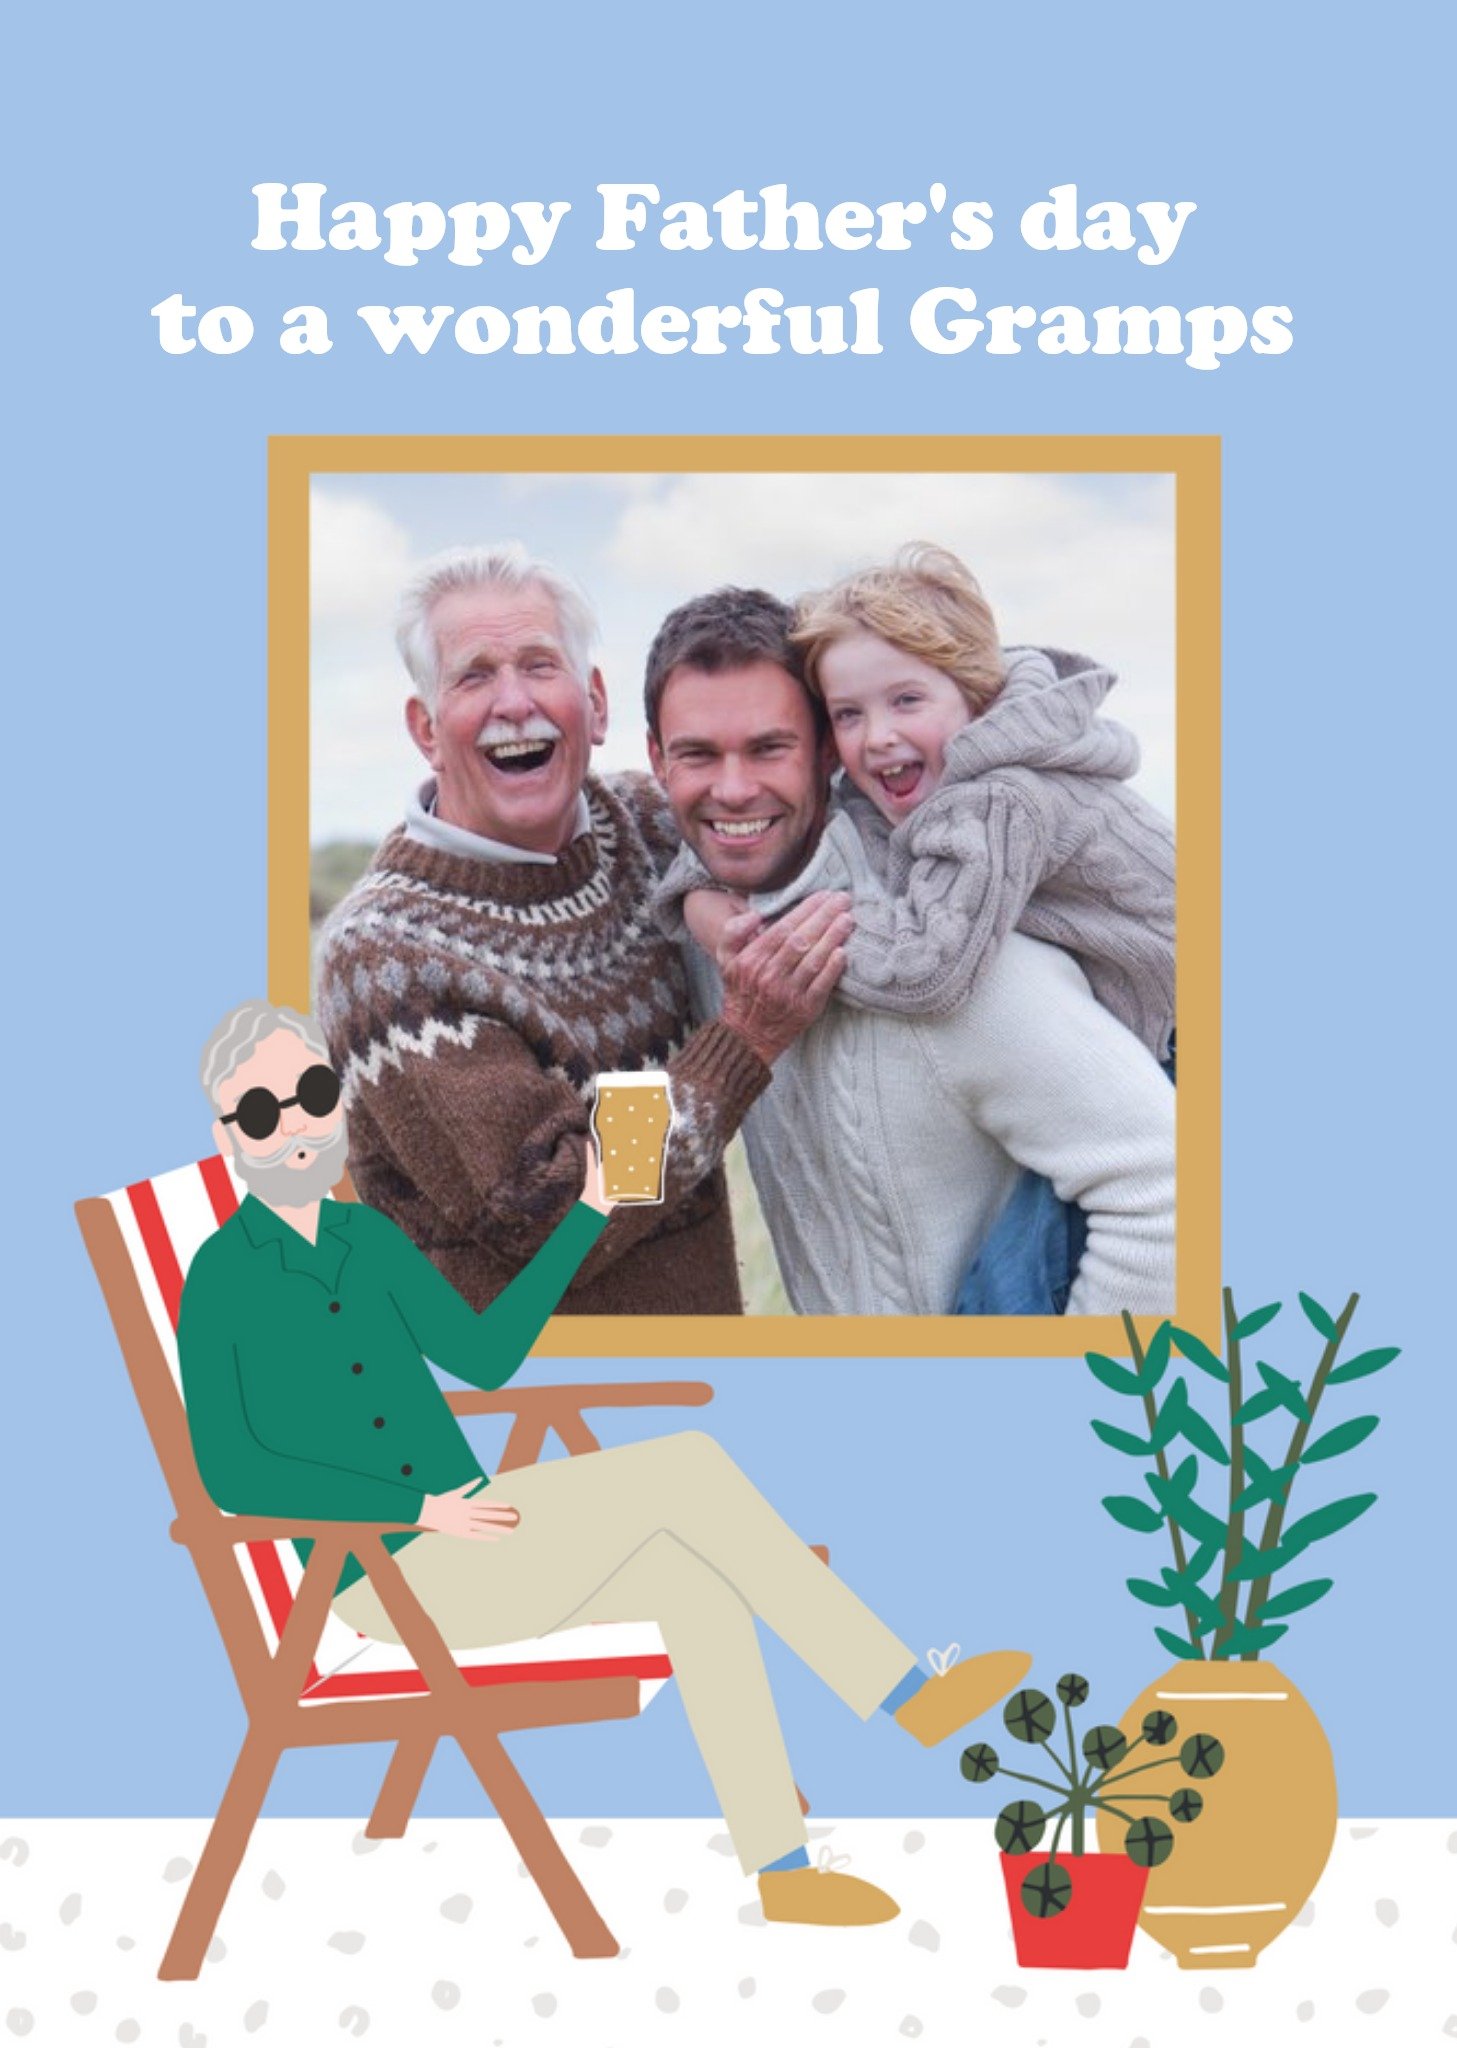 Moonpig Illustrated Wonderful Gramps Photo Upload Father's Day Card Ecard